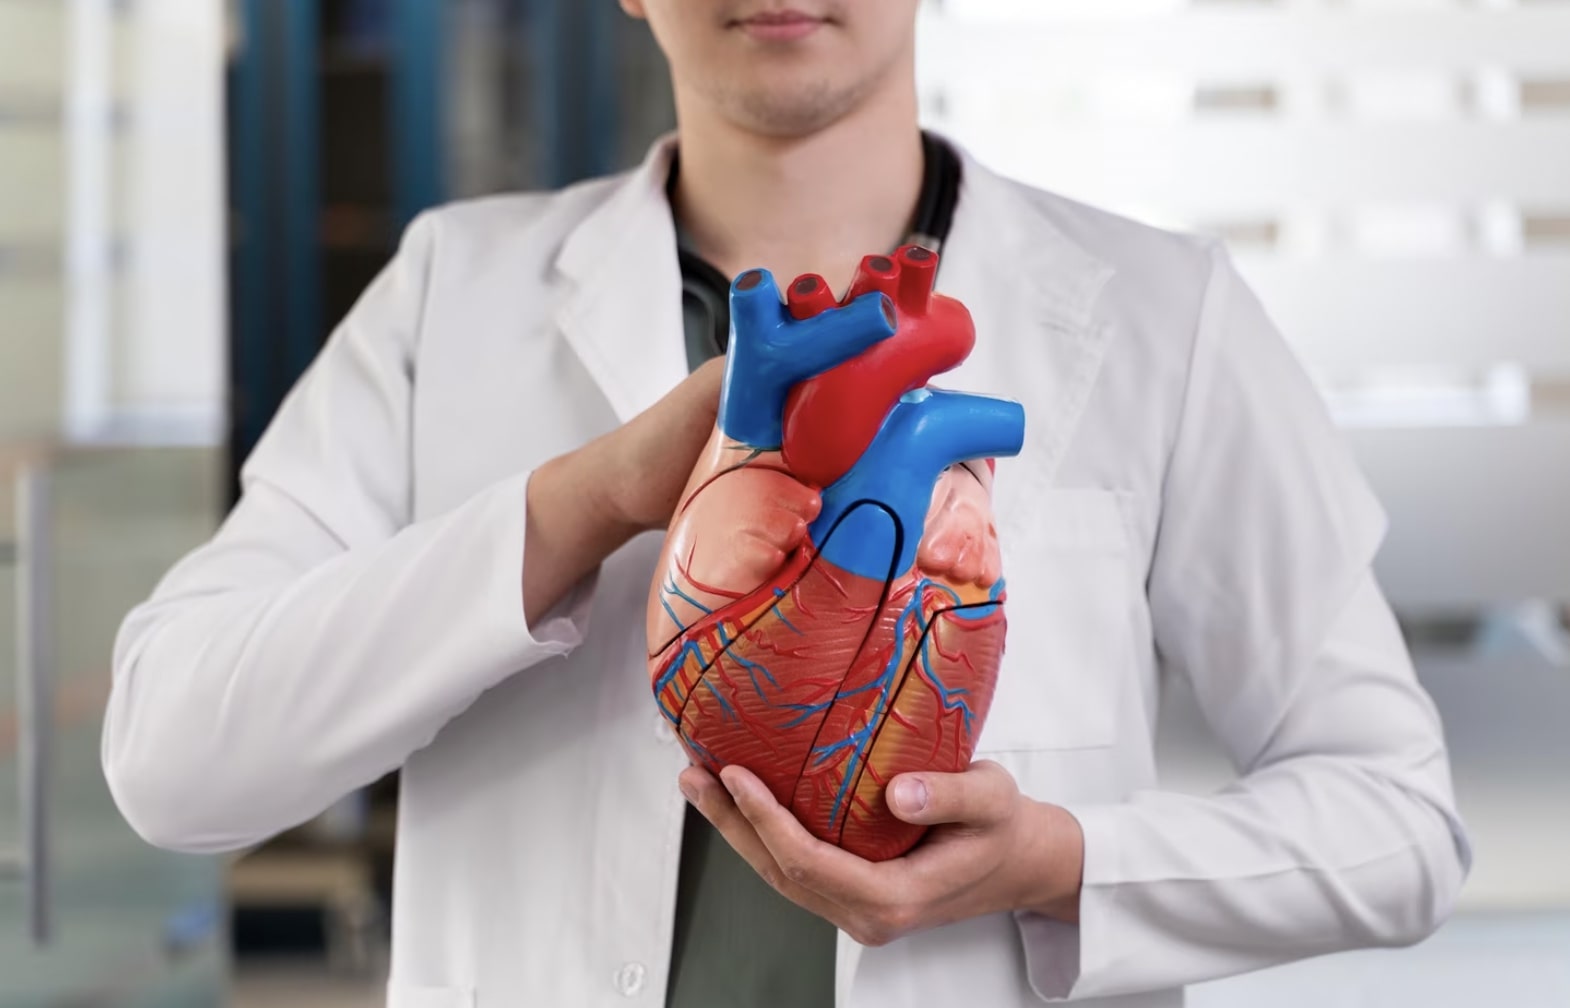 Stem cell treatment for heart conditions